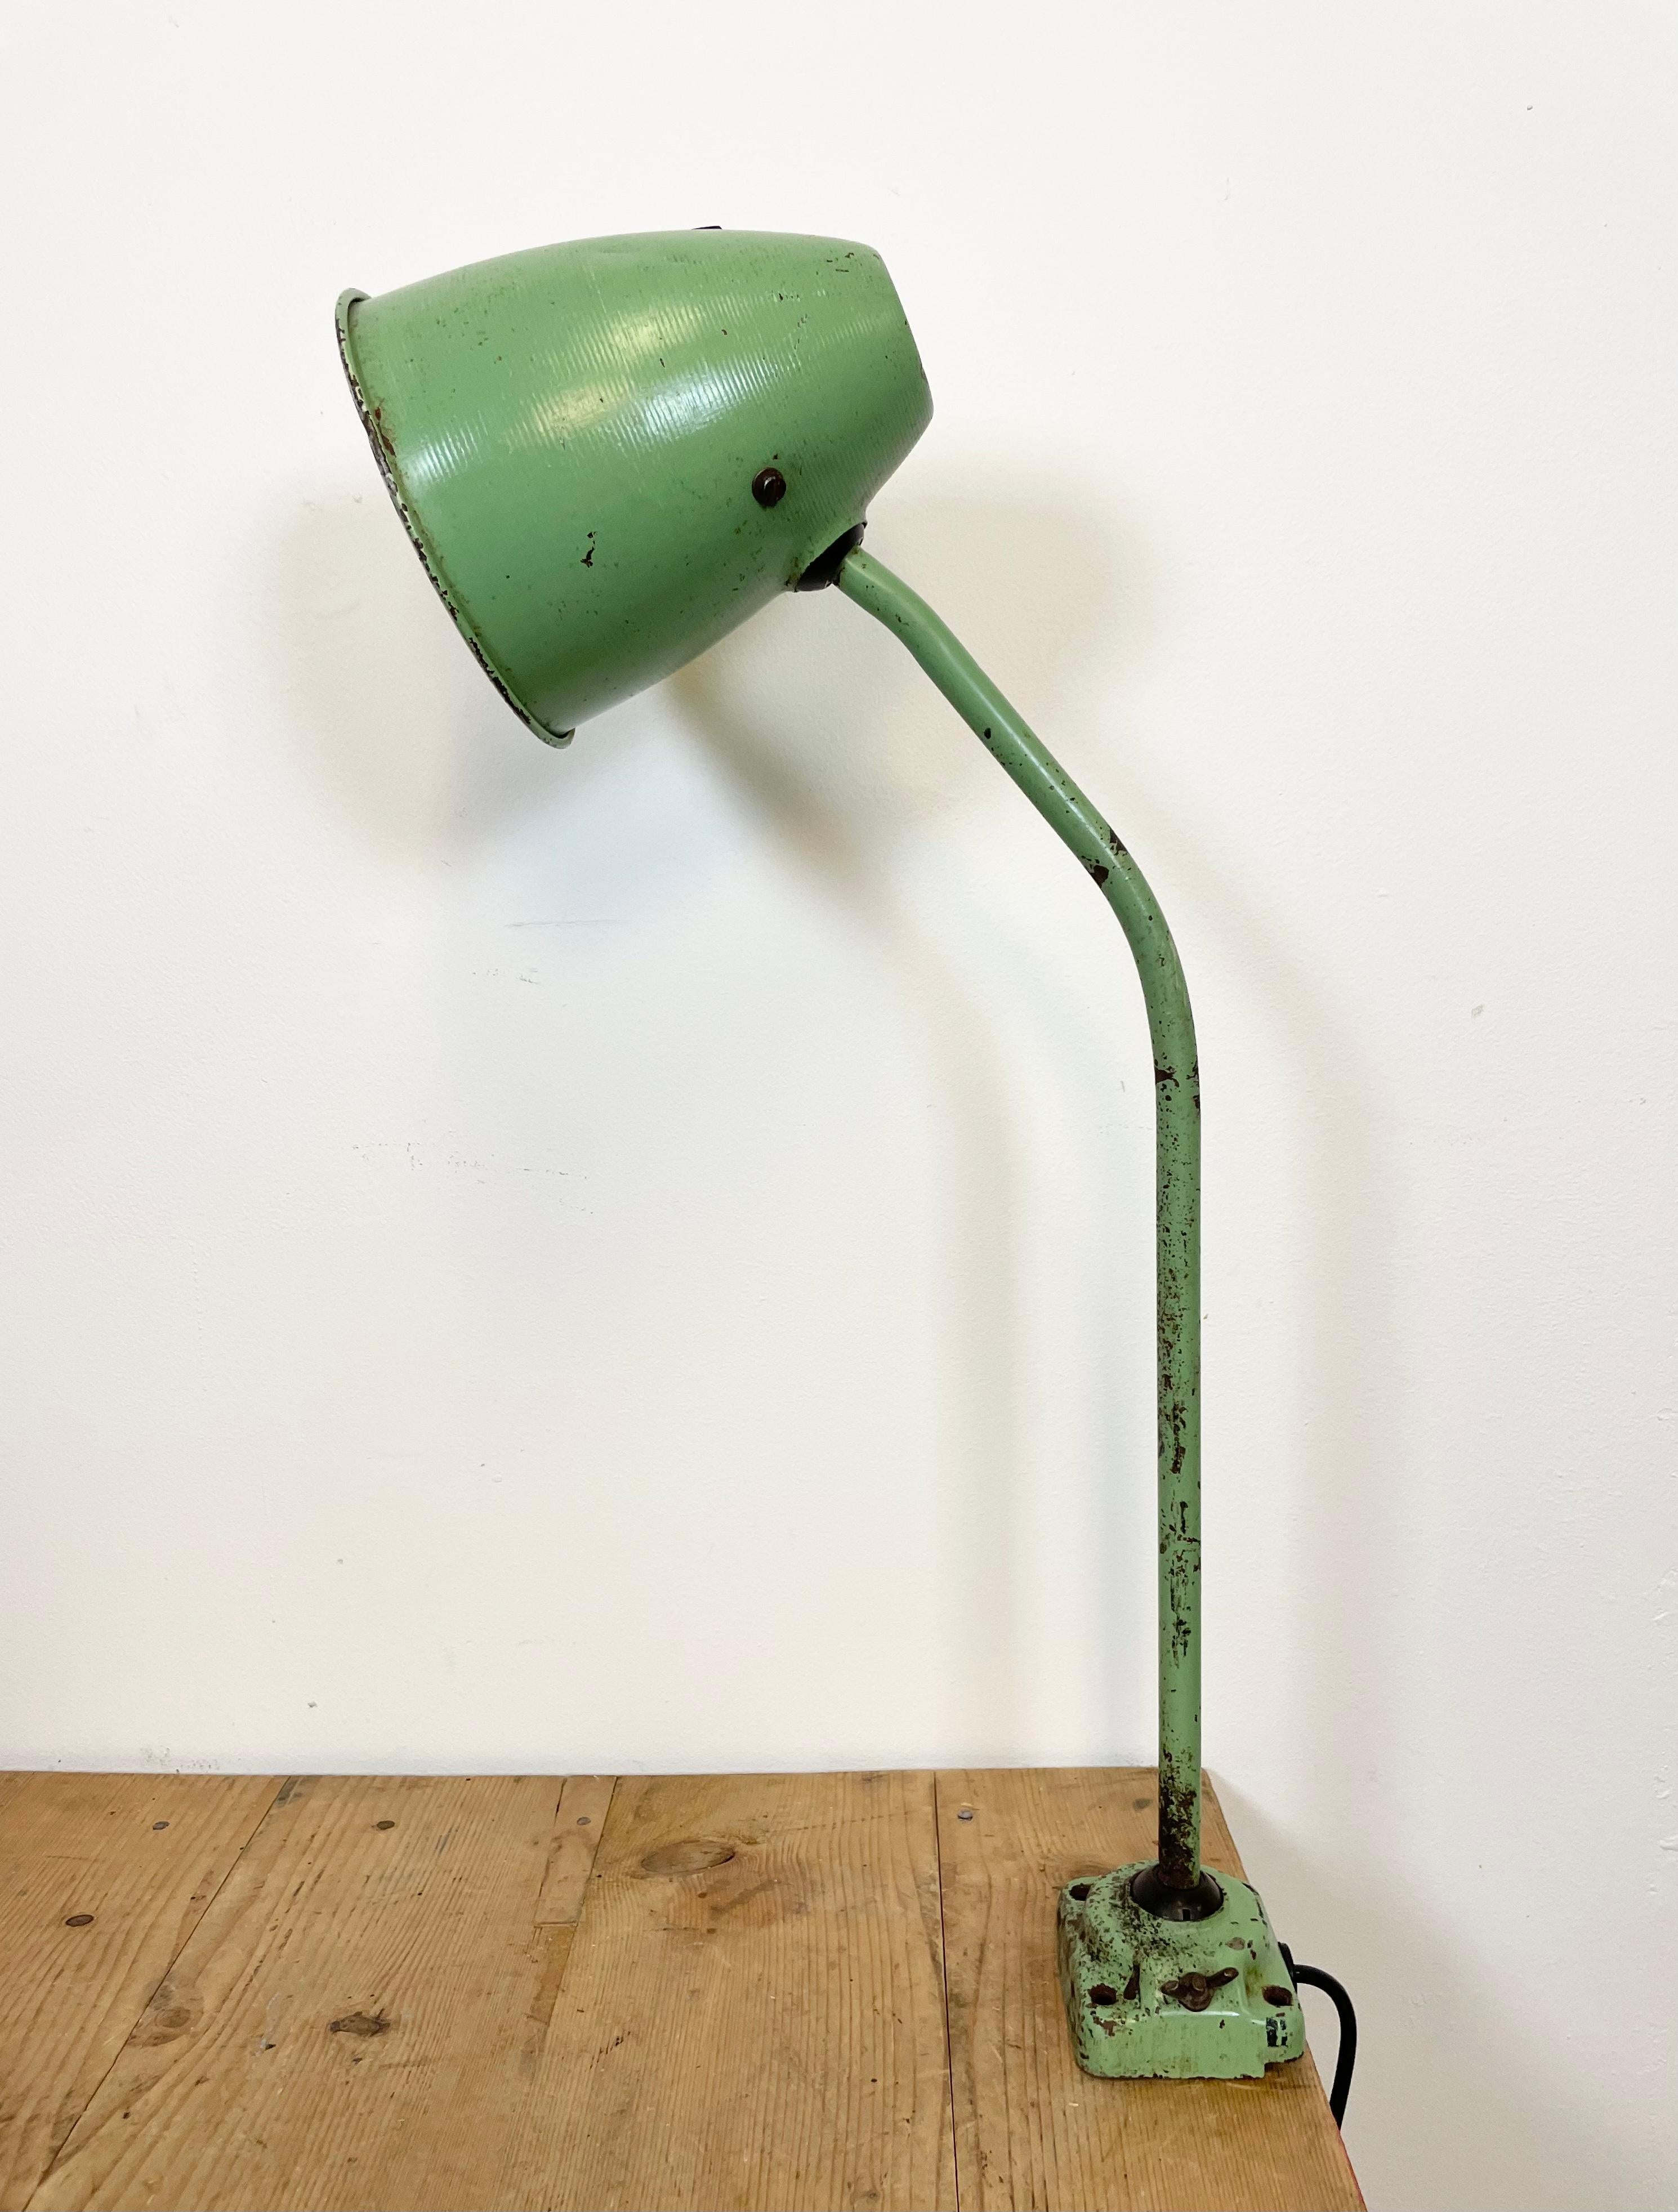 This green industrial style iron table lamp was made in former Czechoslovakia. It features an iron shade ,base and arm, two adjustable joints, a porcelain socket for E 27 light bulbs and new wire. The original switch is situated directly on the